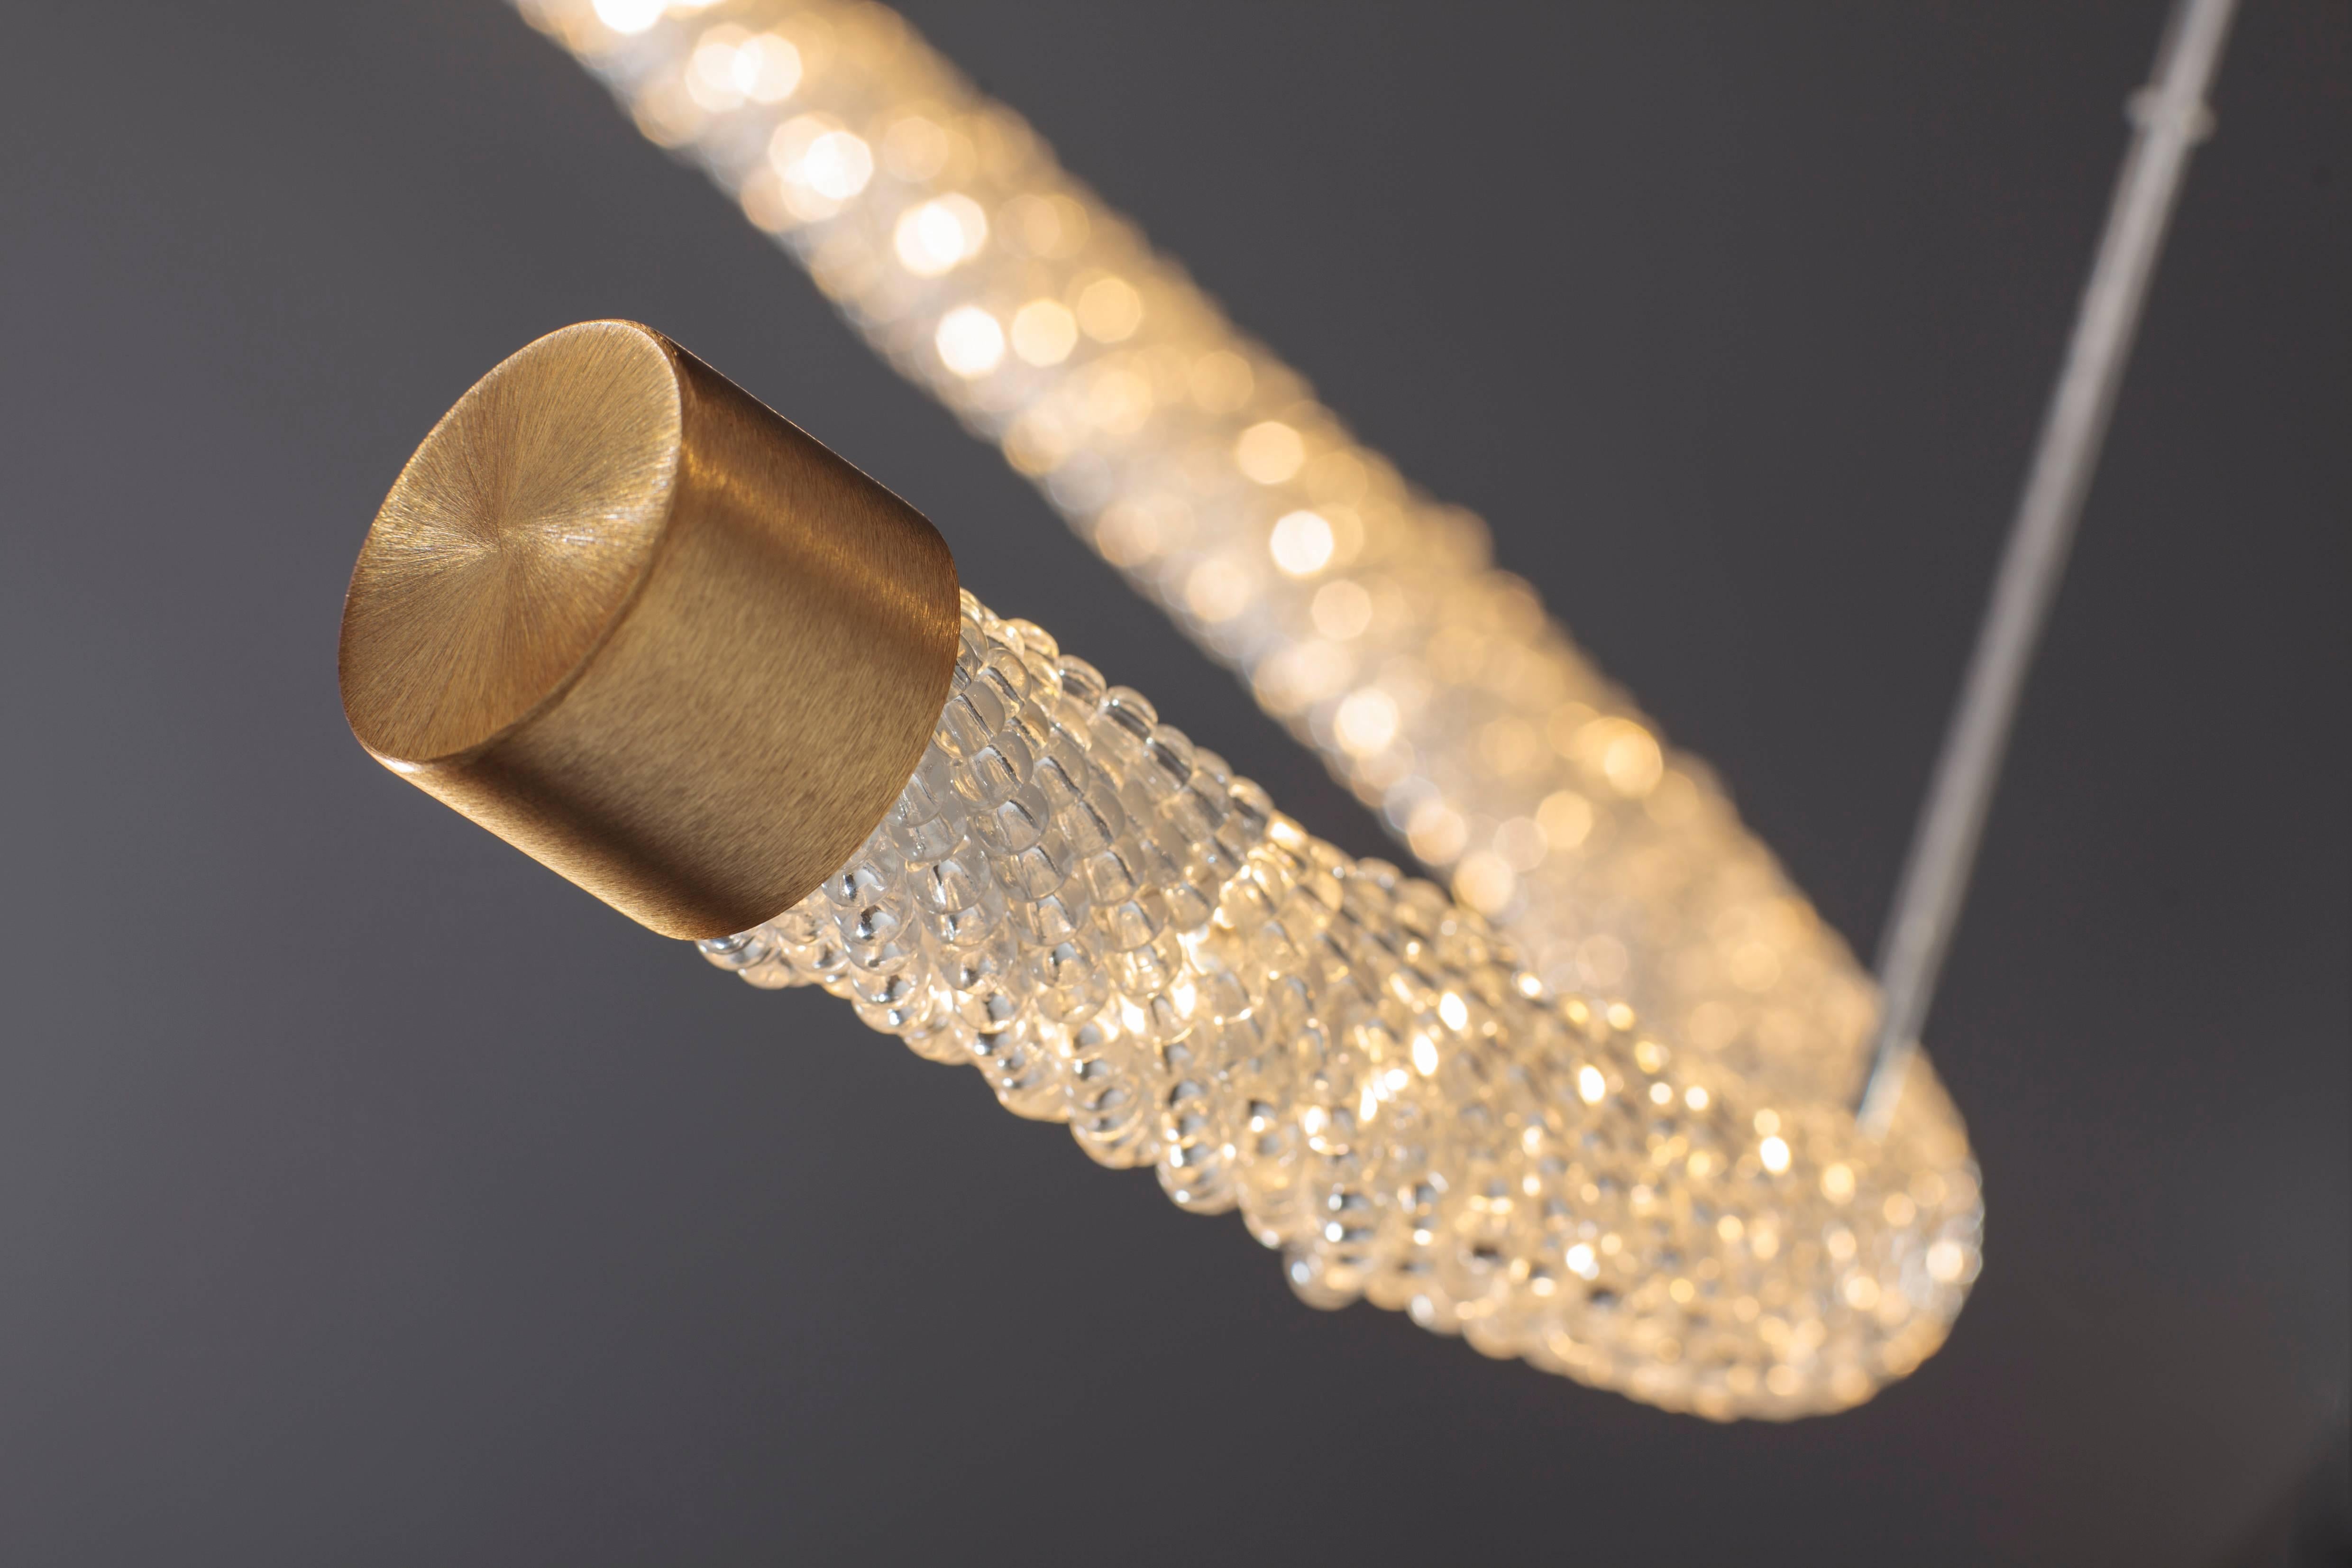 The Mico series explores the concept and experience of pure light, personifying Baroncelli’s commitment to progressive design and exceptional craftsmanship. Available as a ring or baton, the warm and natural LED radiates throughout each framework,